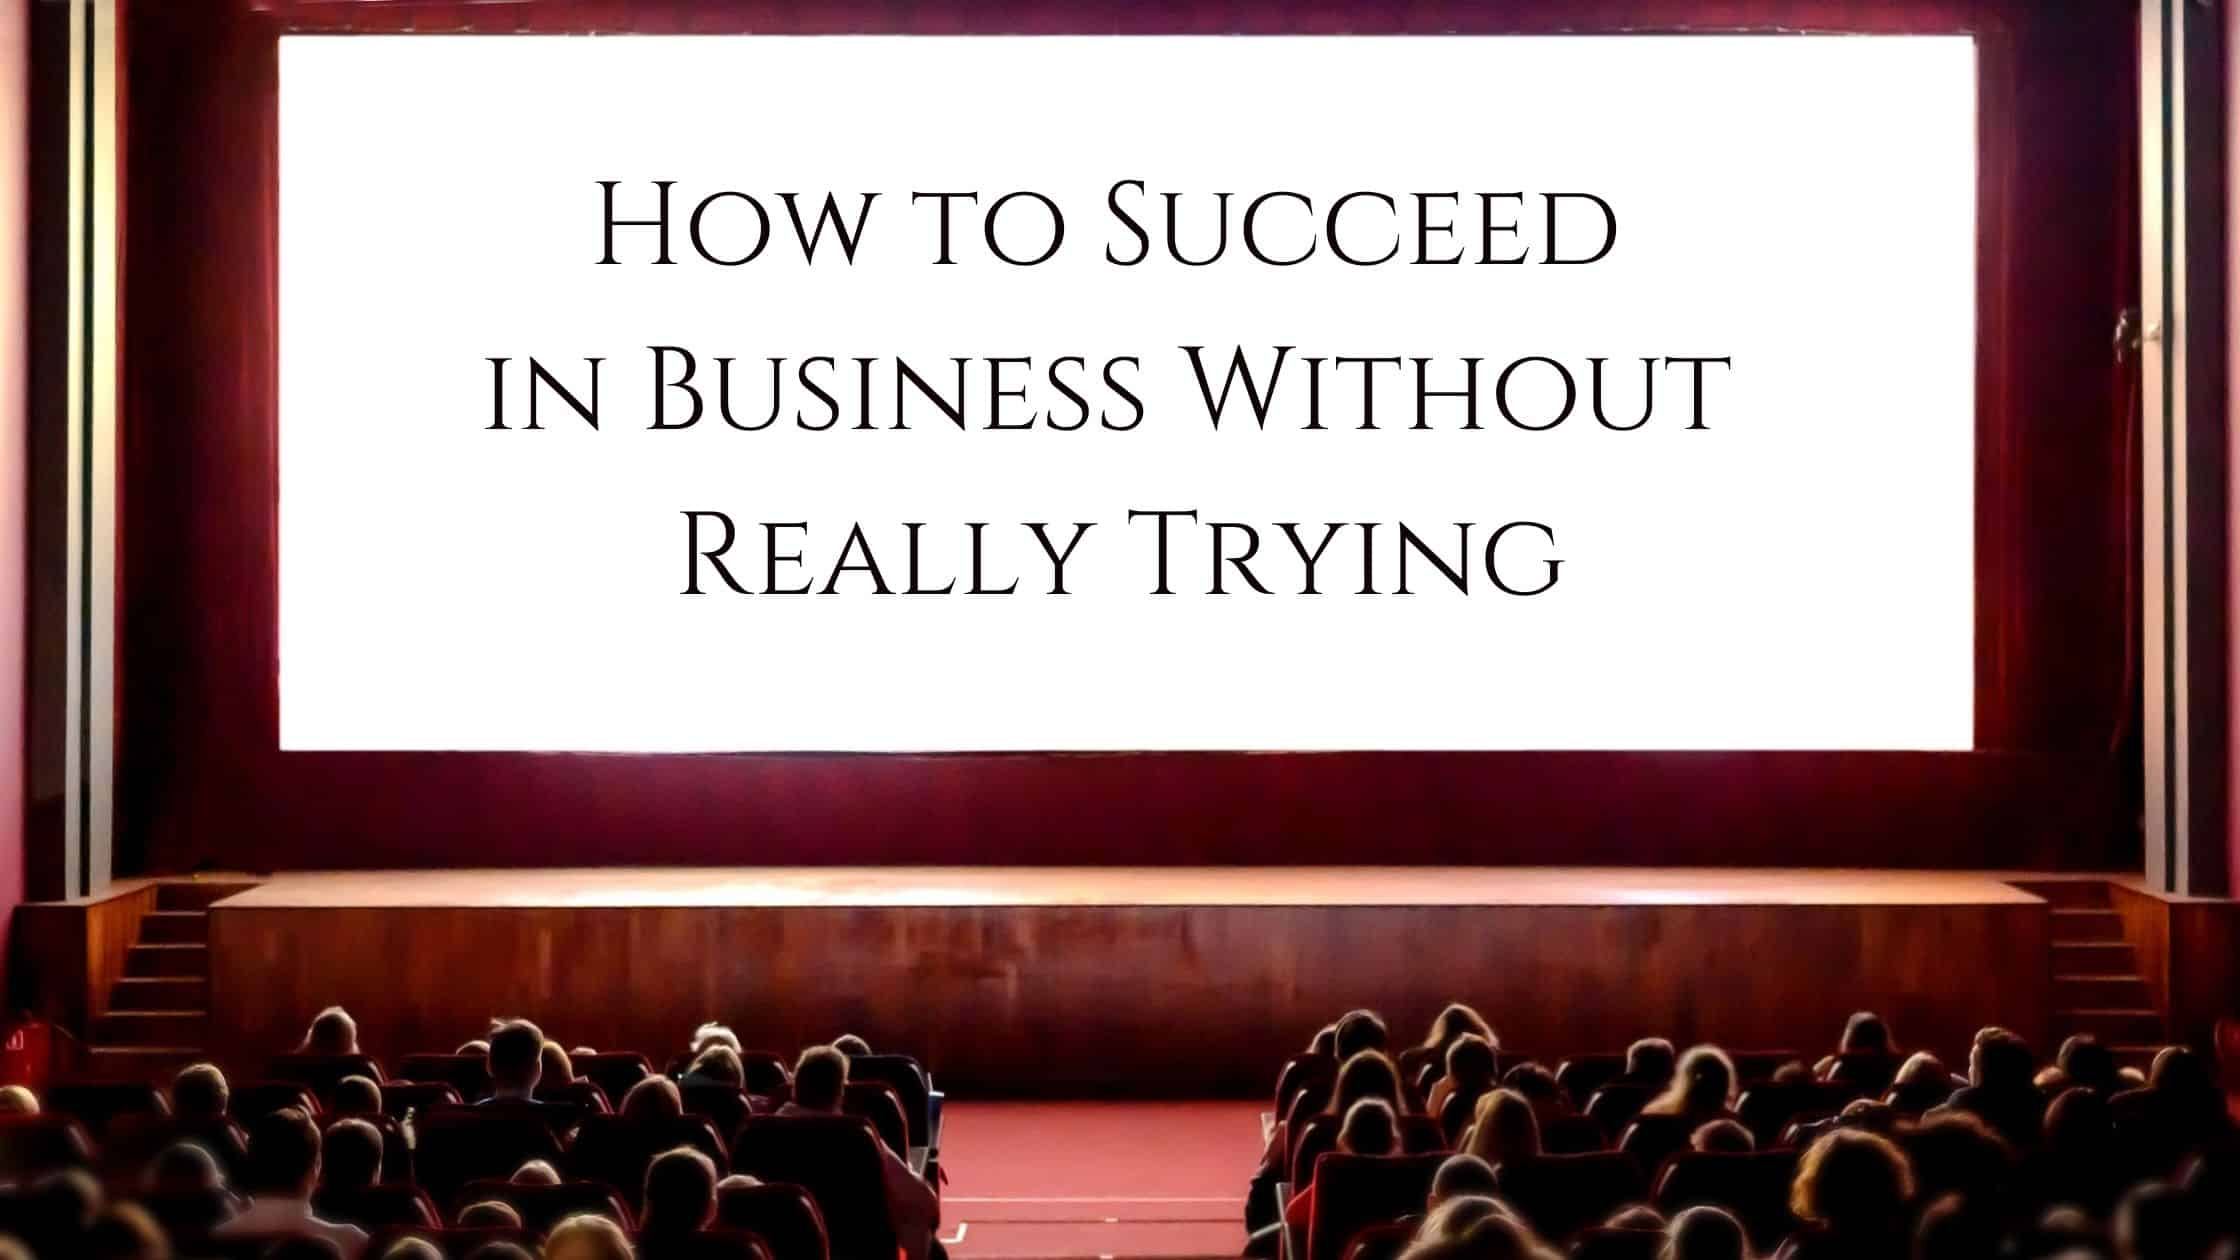 How to succeed in business without any effort.